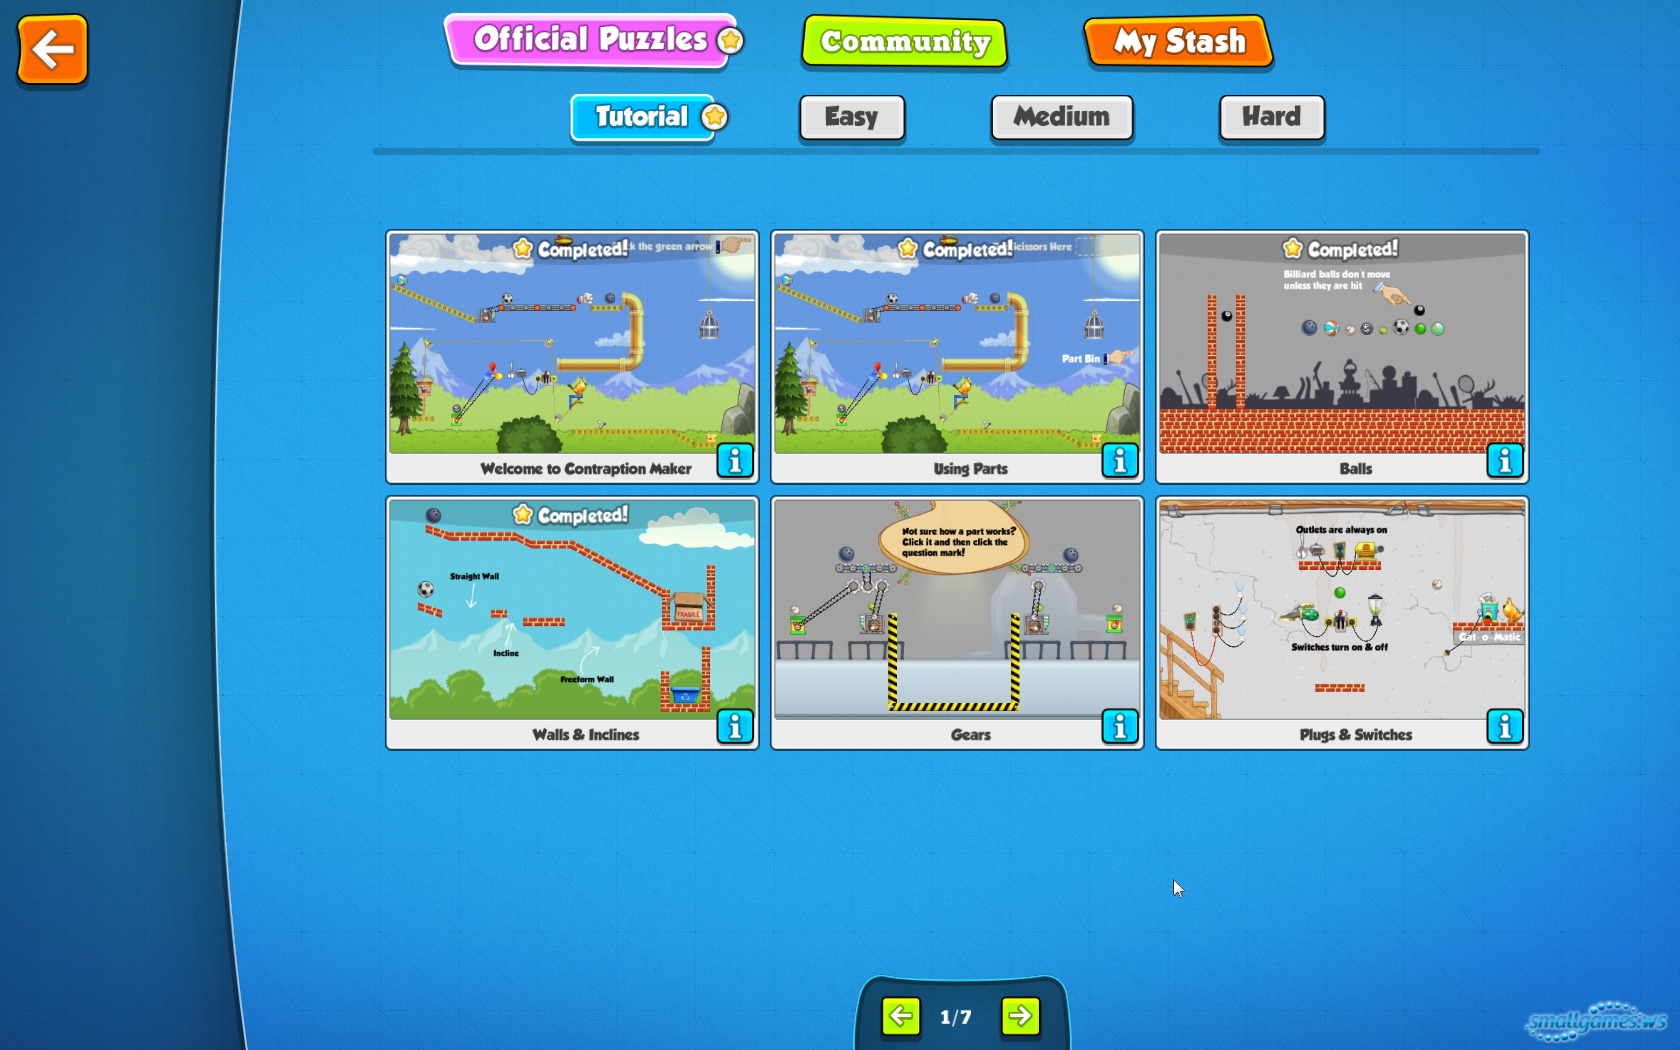 already bought contraption maker